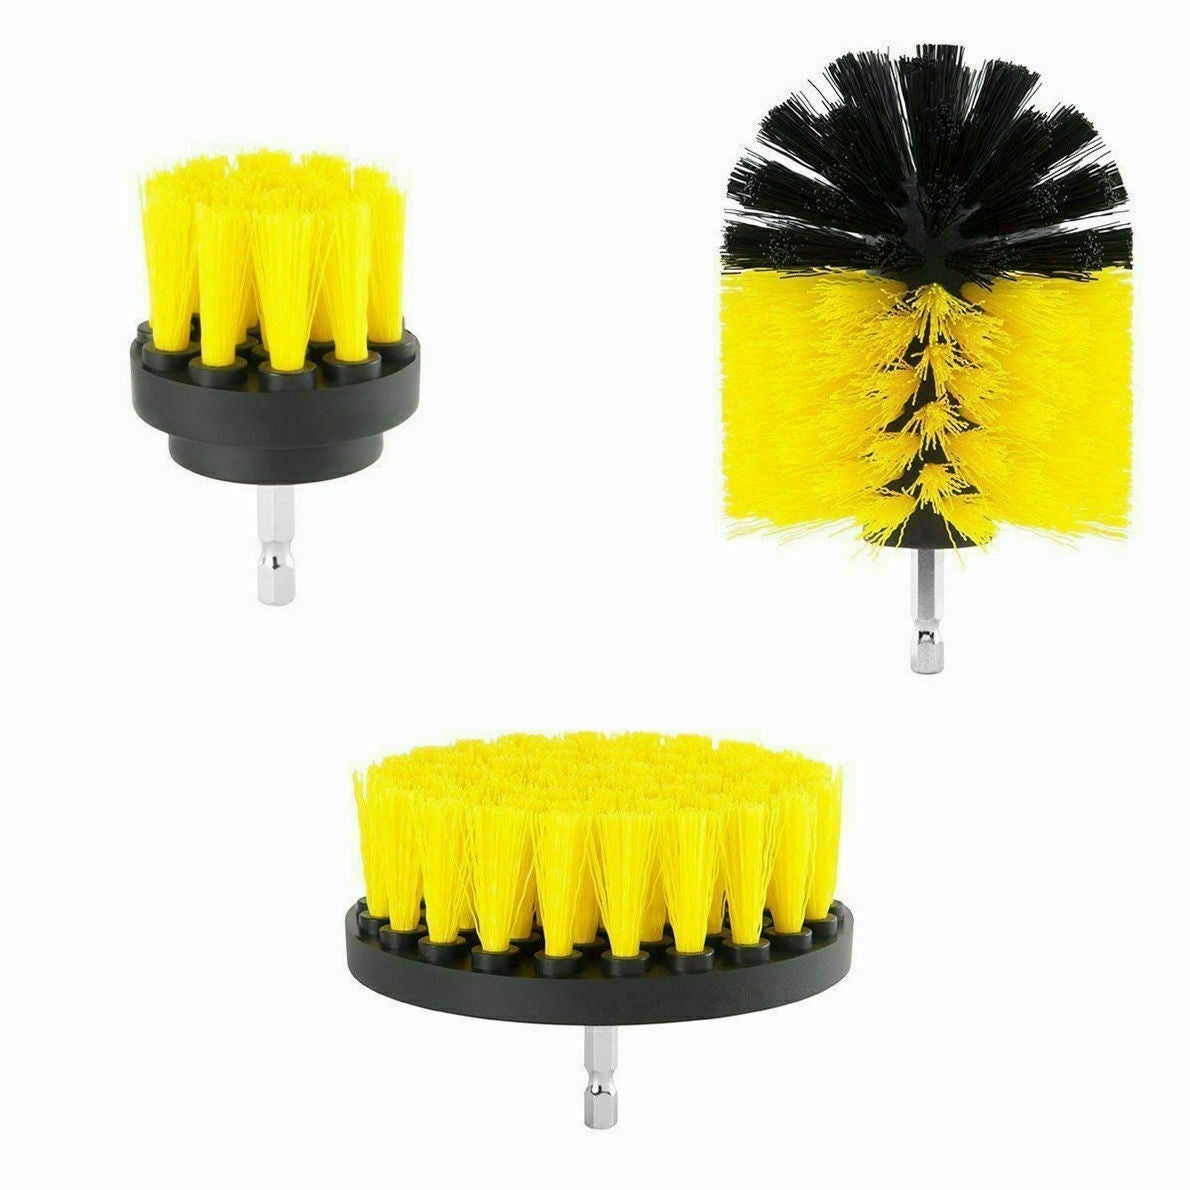 Ozoffer Scrubber Grout Power Cleaning Drill Brush Tub Cleaner Combo Tool Kit Yellow